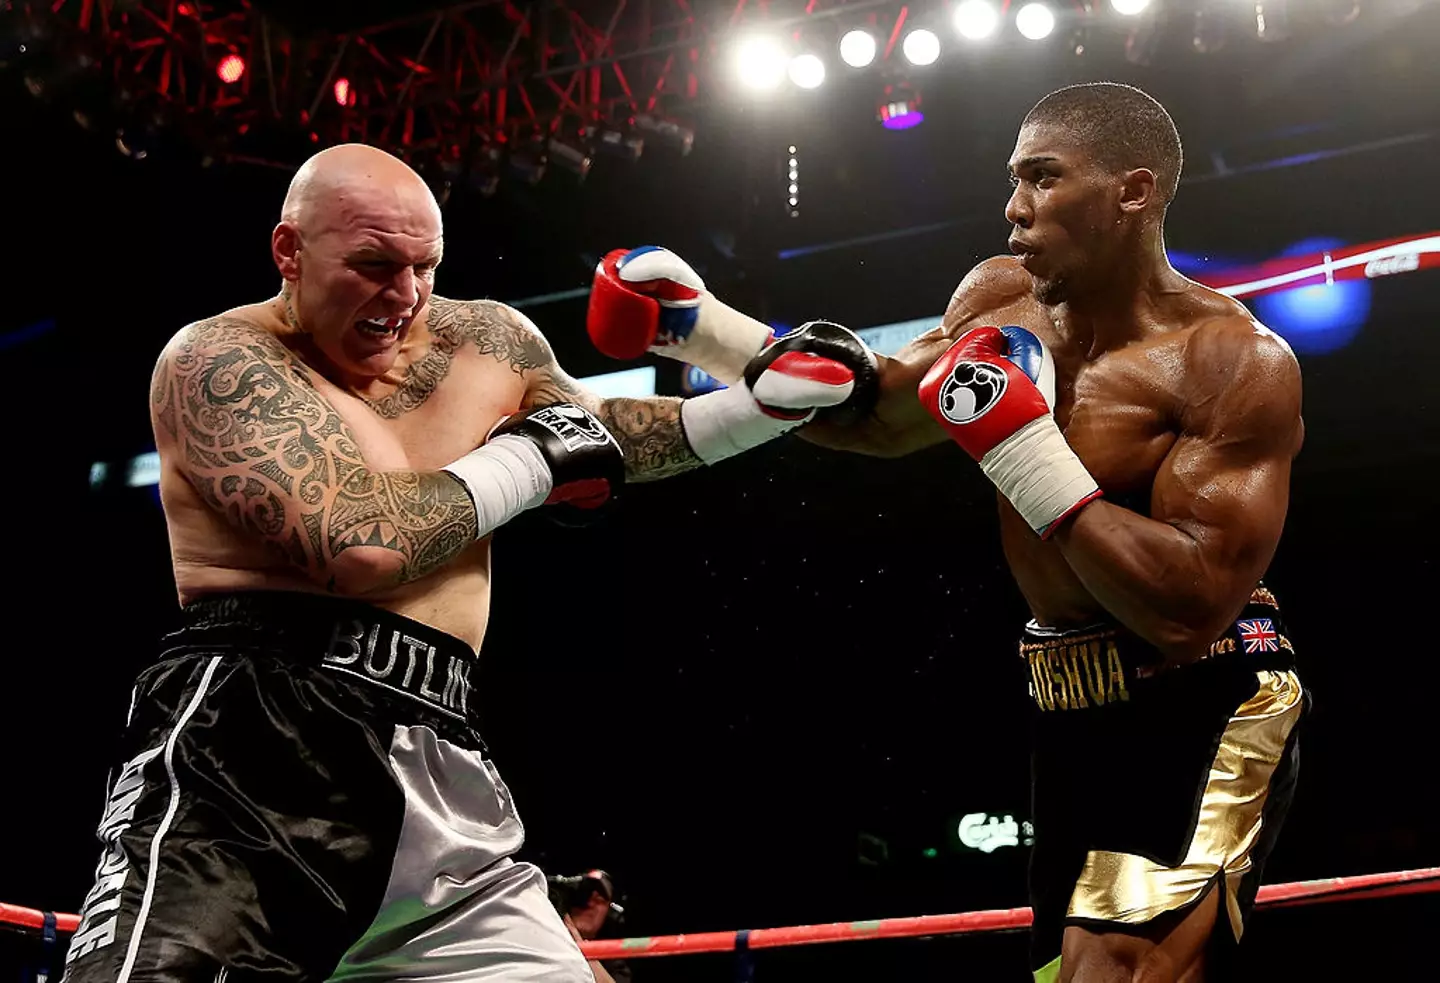 Paul Butlin fought Anthony Joshua back in 2013, before he retired from boxing in 2016.